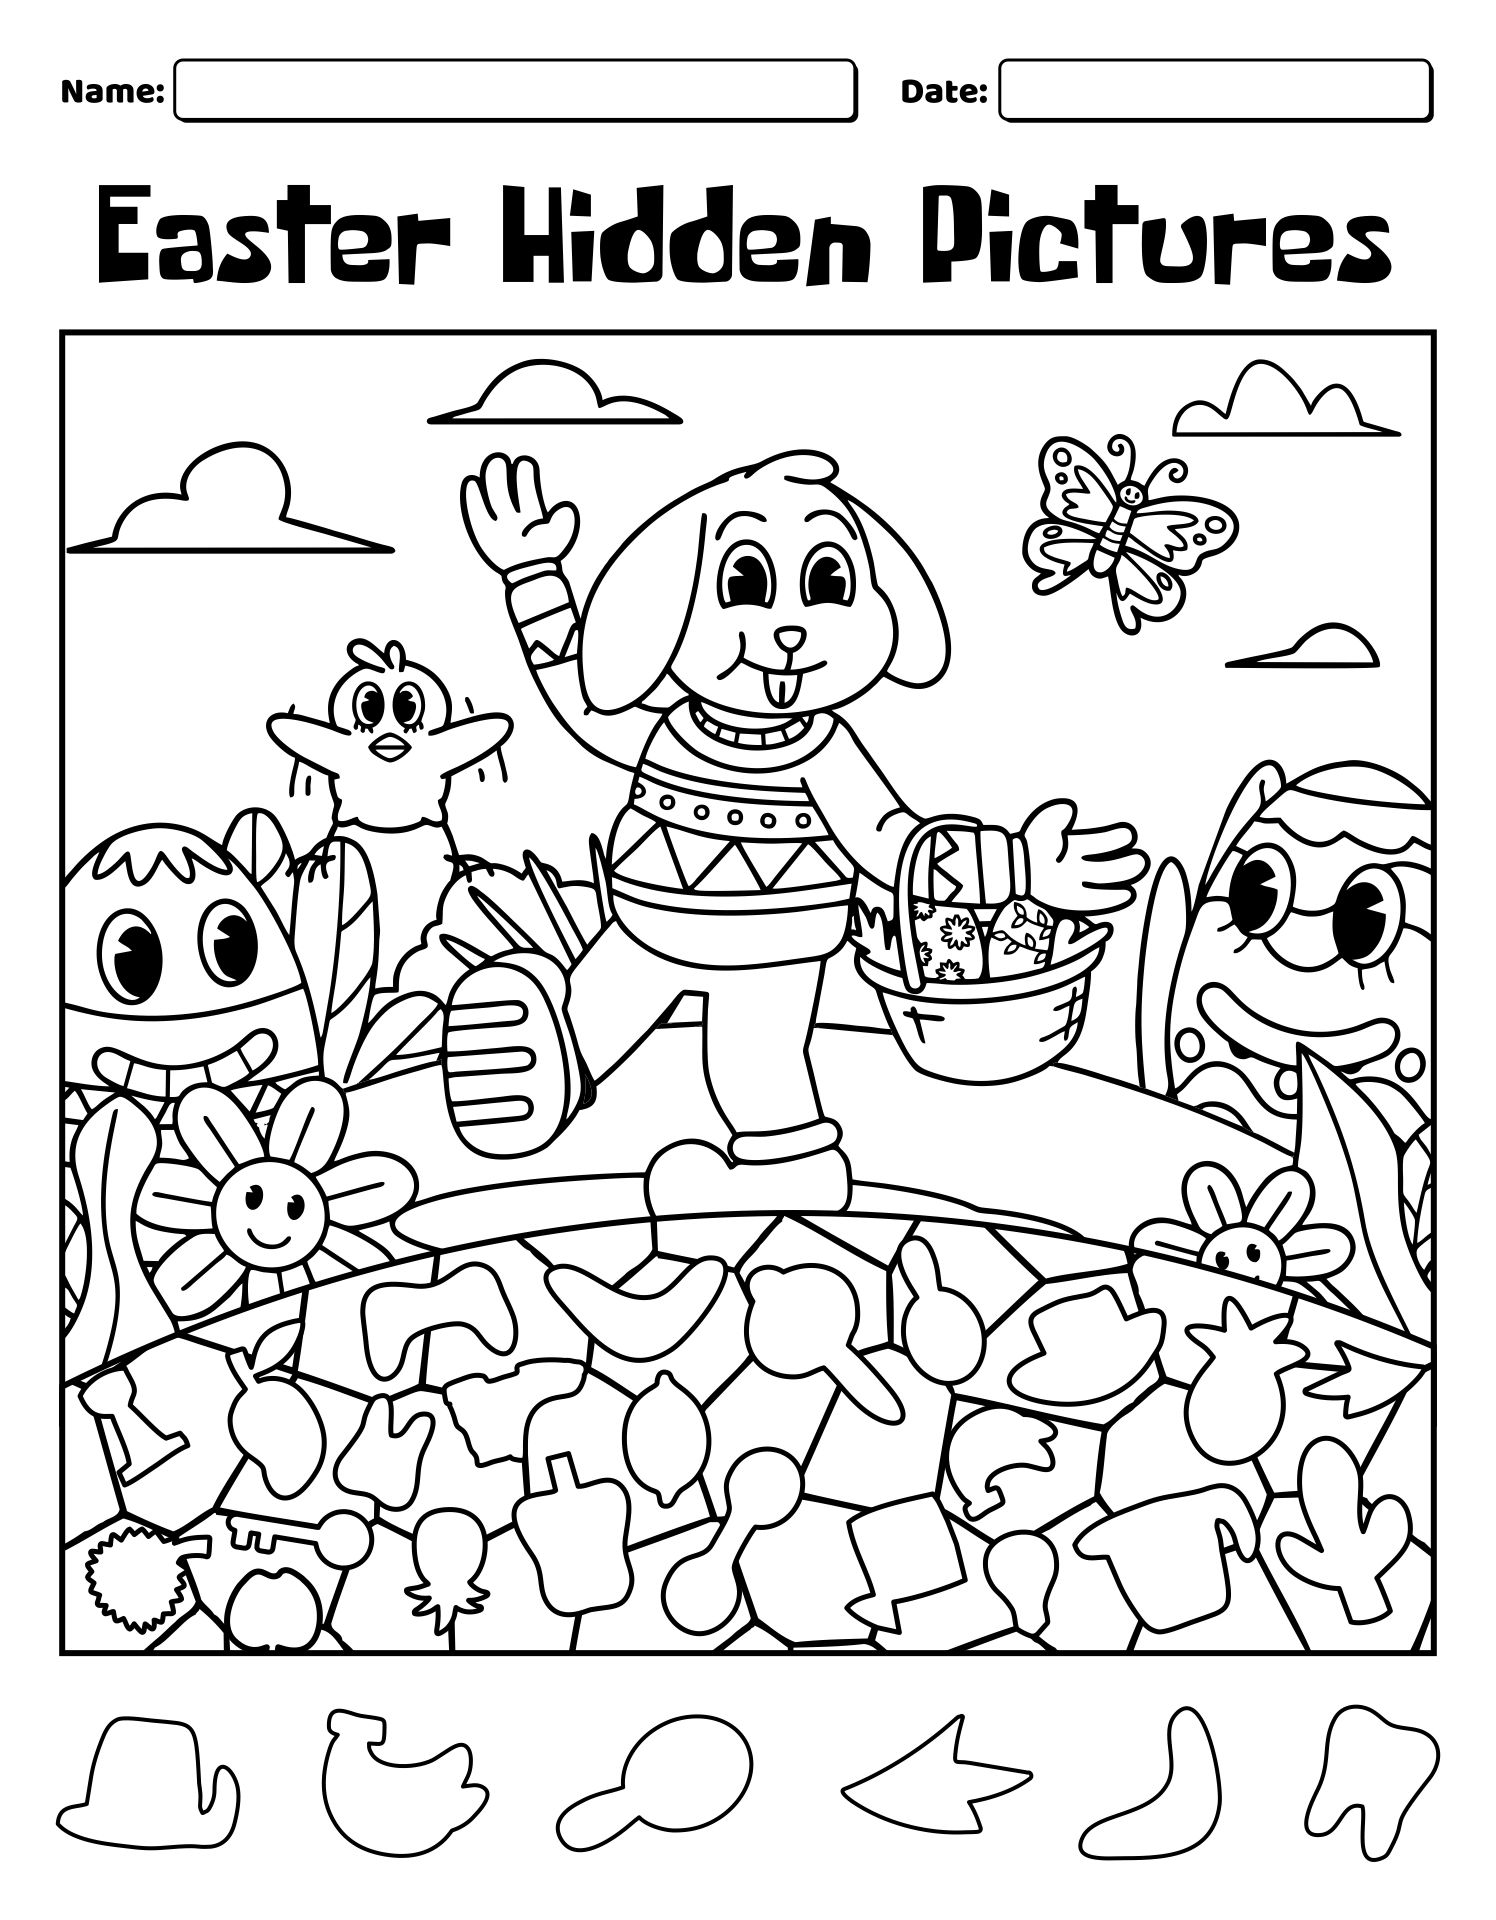 Printable Easter Hidden Picture Puzzle